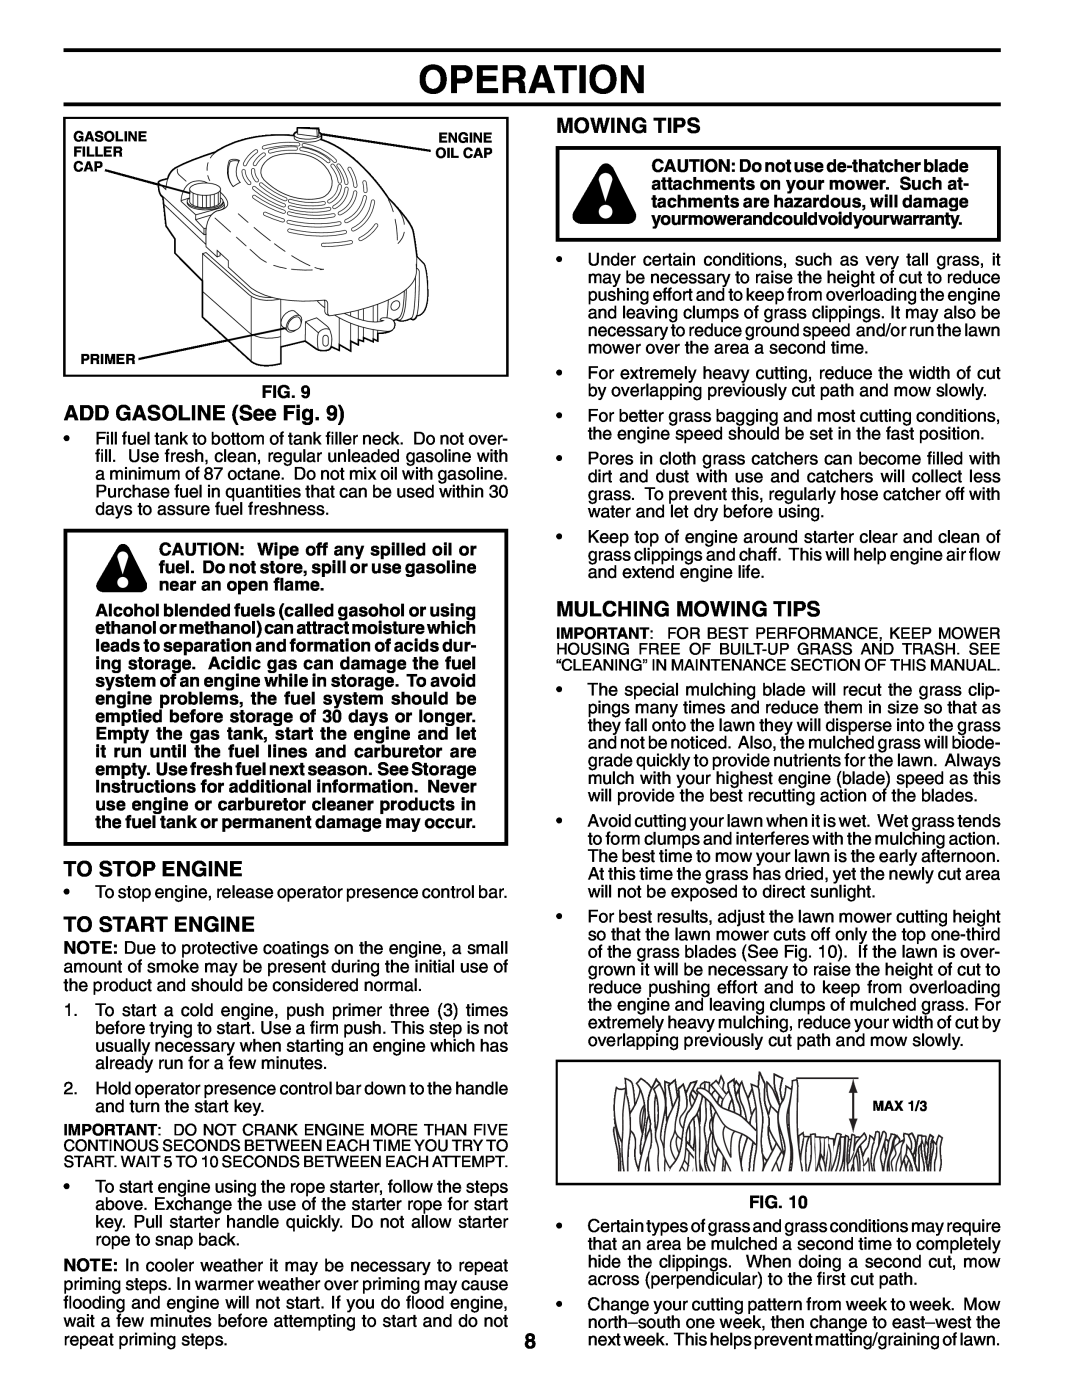 Husqvarna 65021ES owner manual ADD GASOLINE See Fig, To Stop Engine, To Start Engine, Mulching Mowing Tips, Operation 